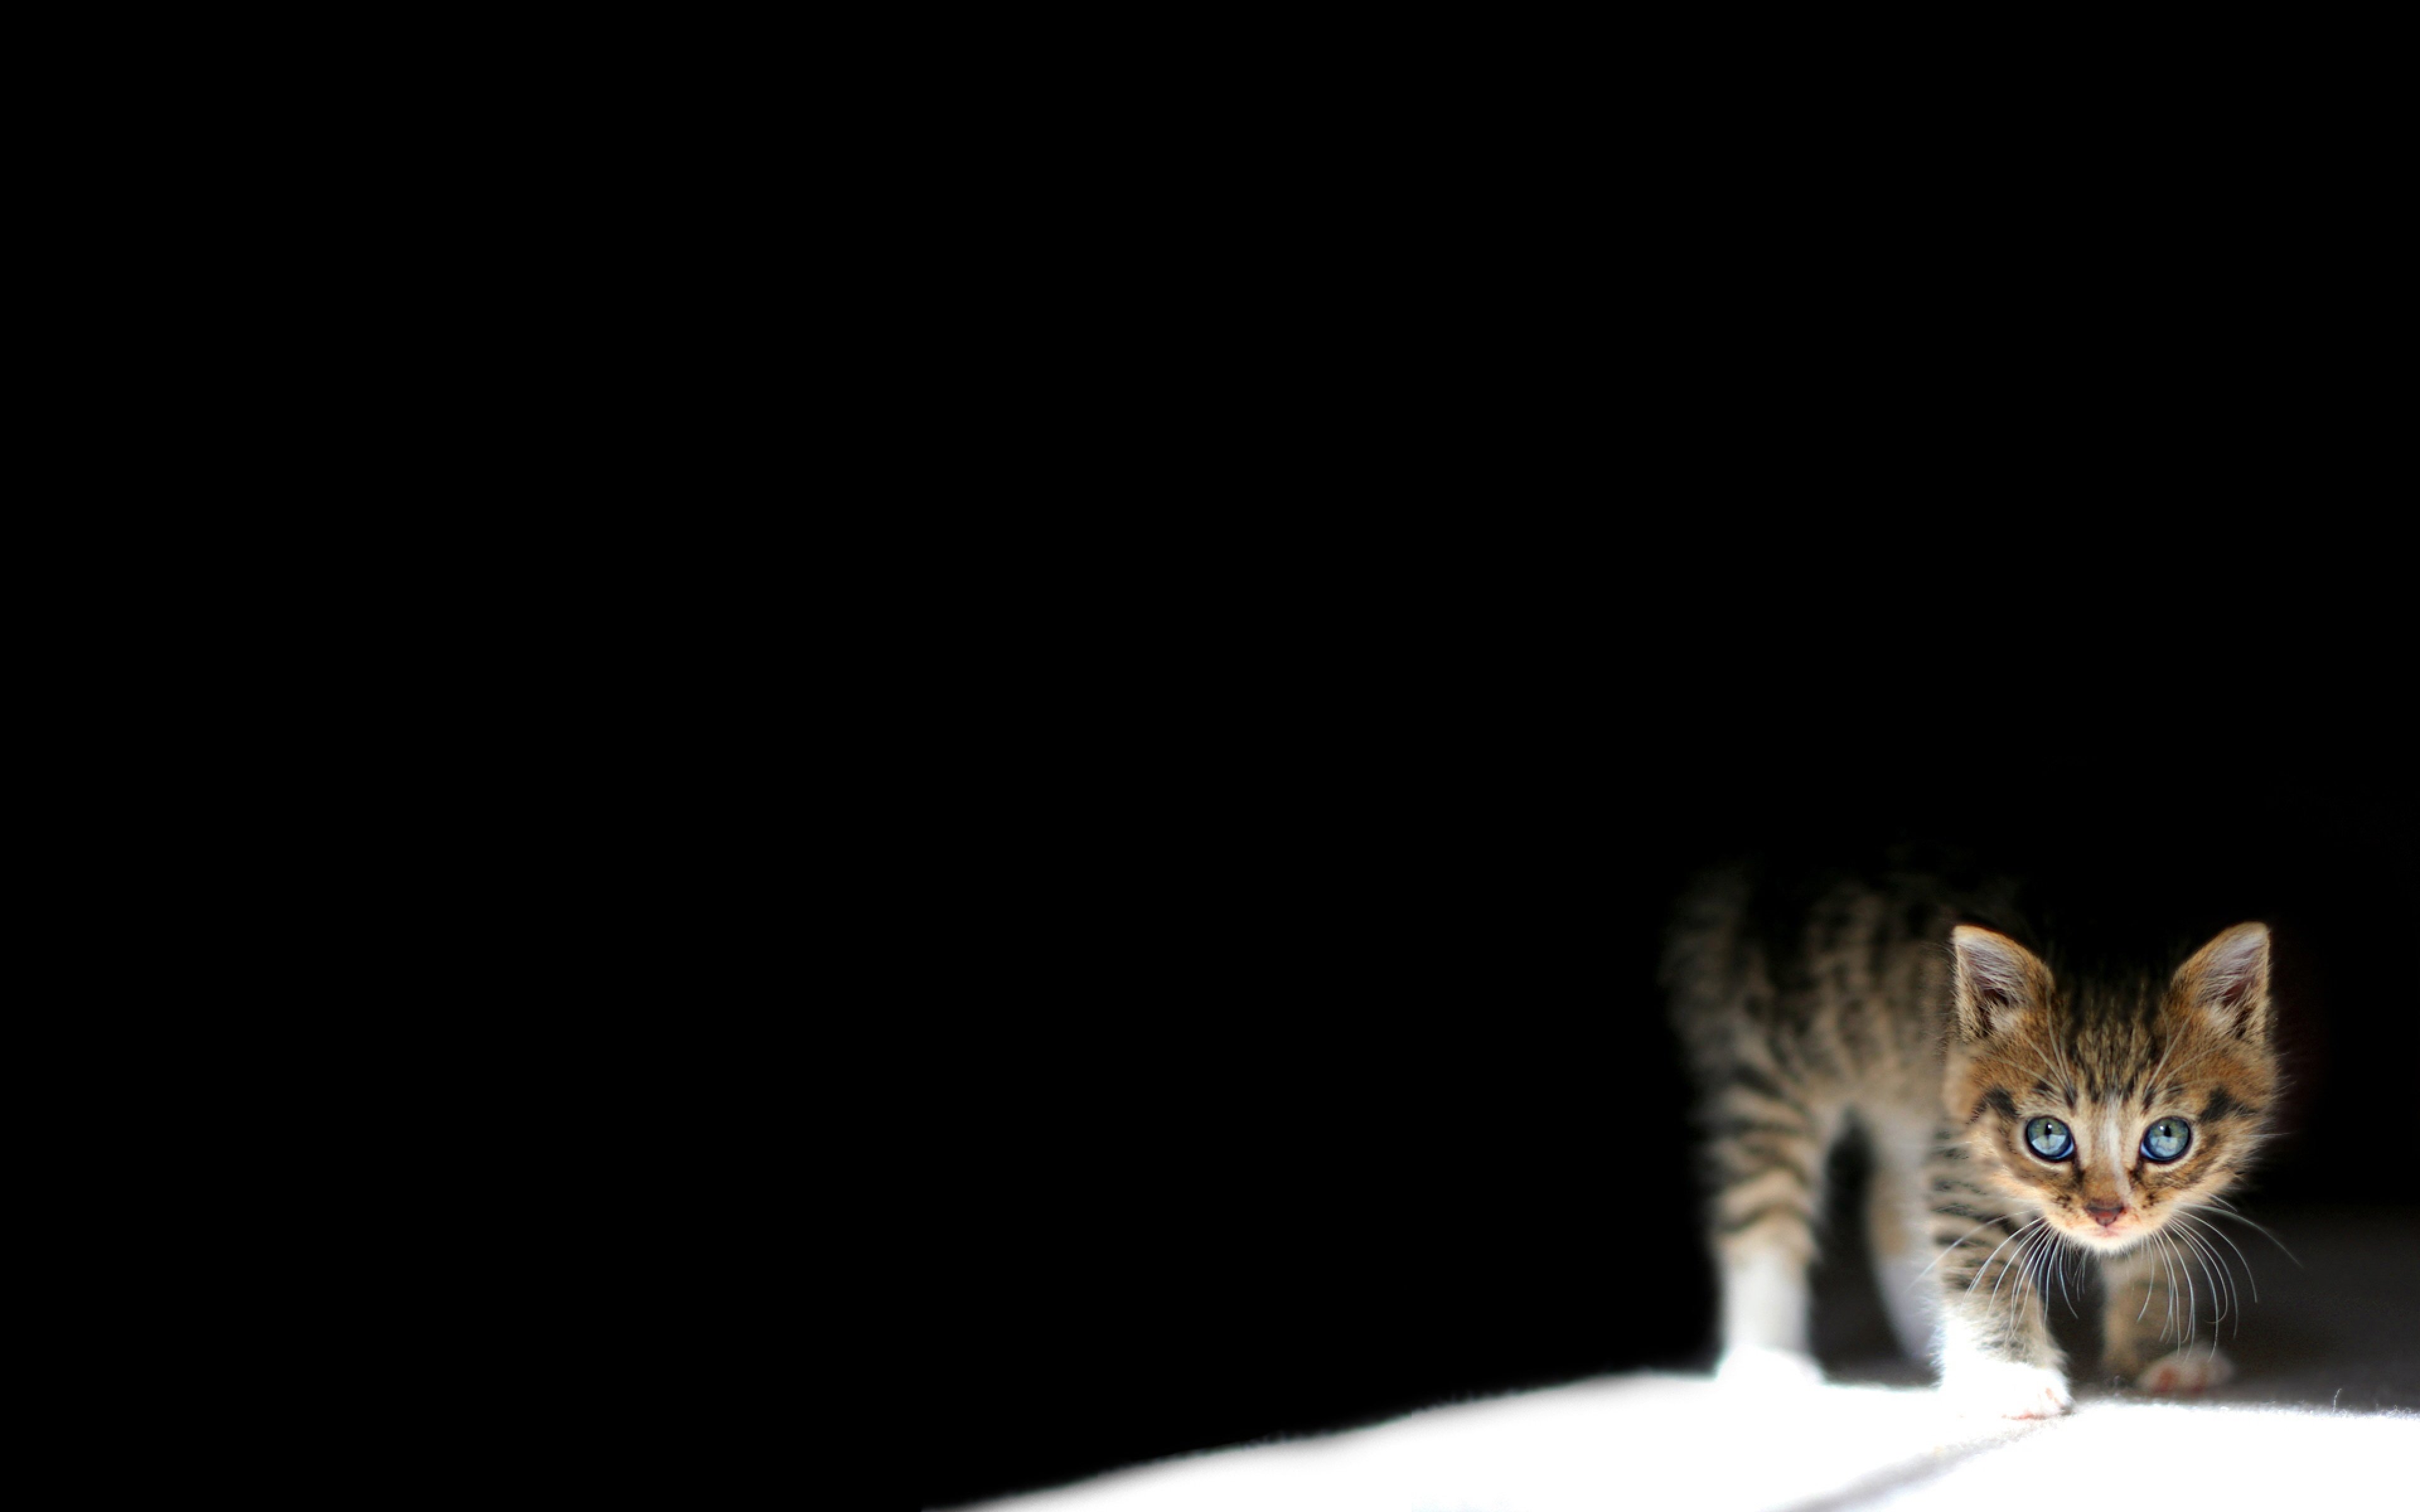 lonely, Mood, Sad, Alone, Sadness, Emotion, People, Loneliness, Solitude, Kitten Wallpaper